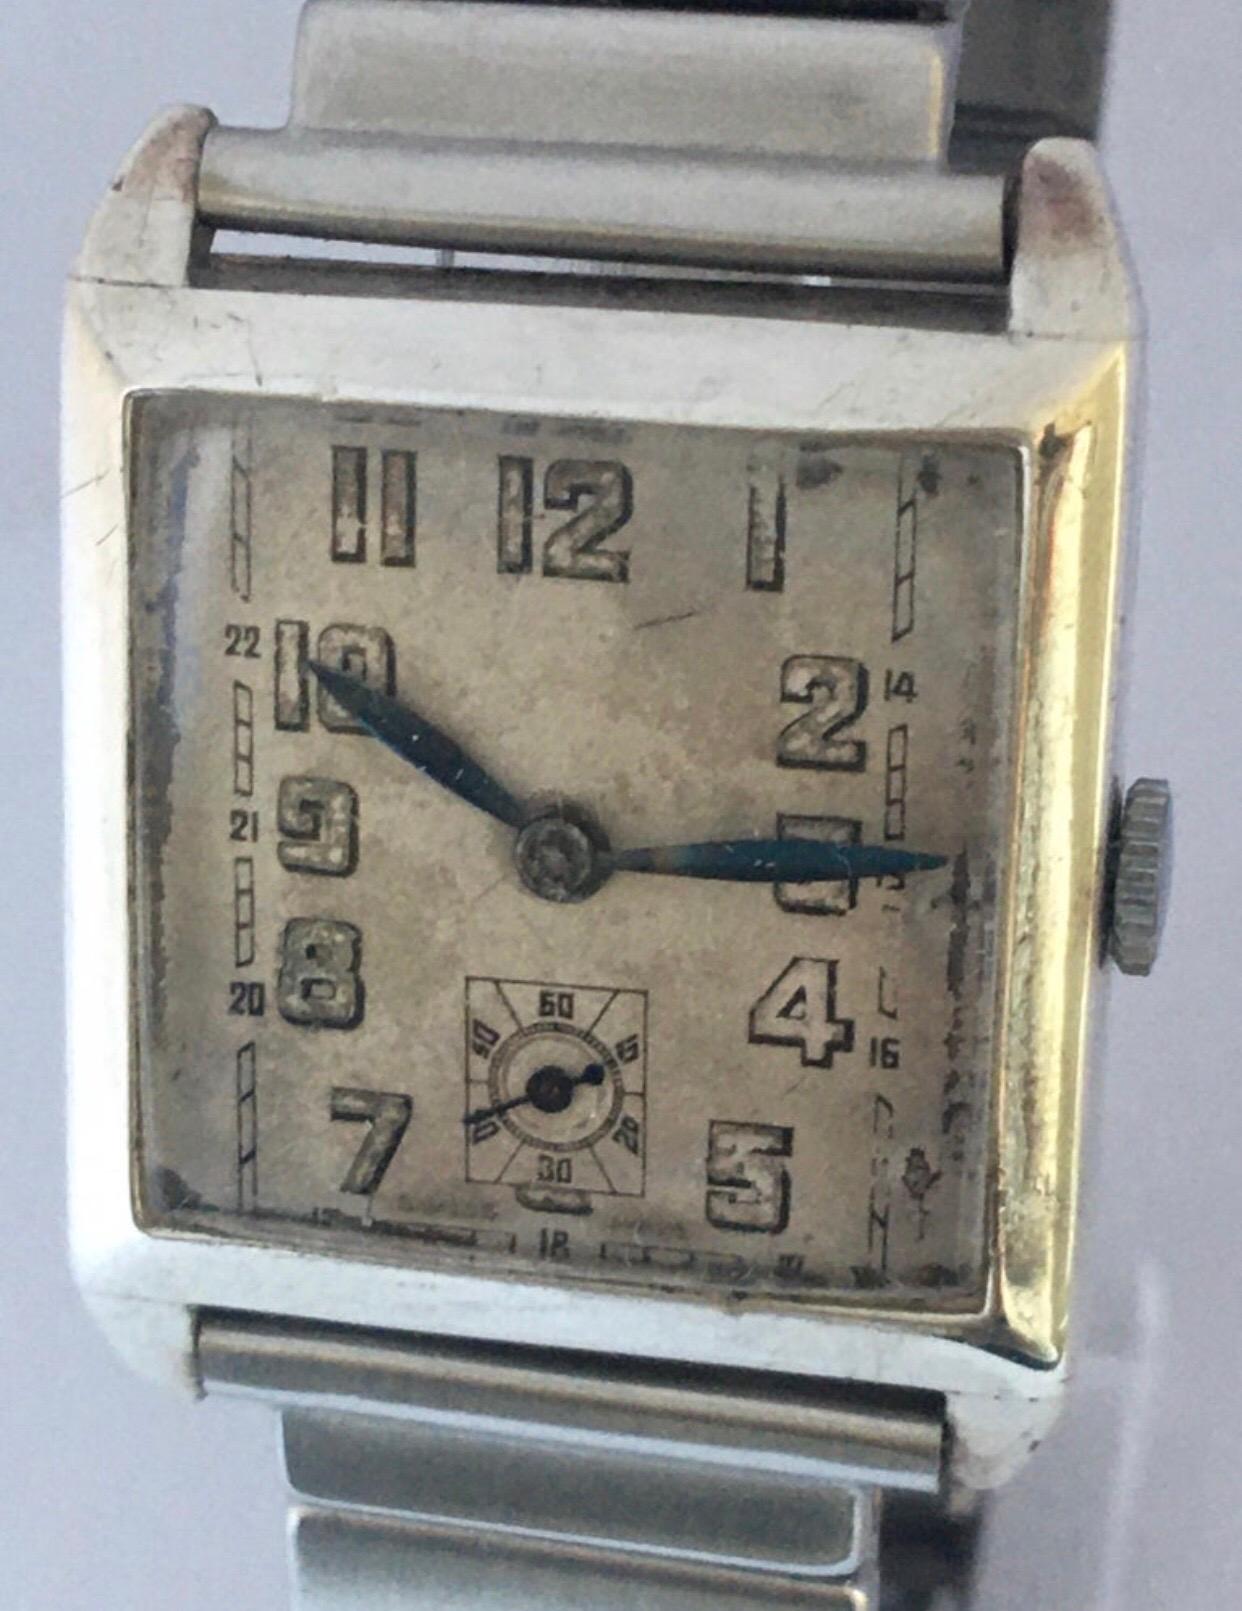 This beautiful pre-owned silver mechanical watch is in good working condition and it has been serviced. Its stainless steel flexible strap is 7 inches long. Visible signs of ageing and wear with slight scratches and tiny dents on the silver watch